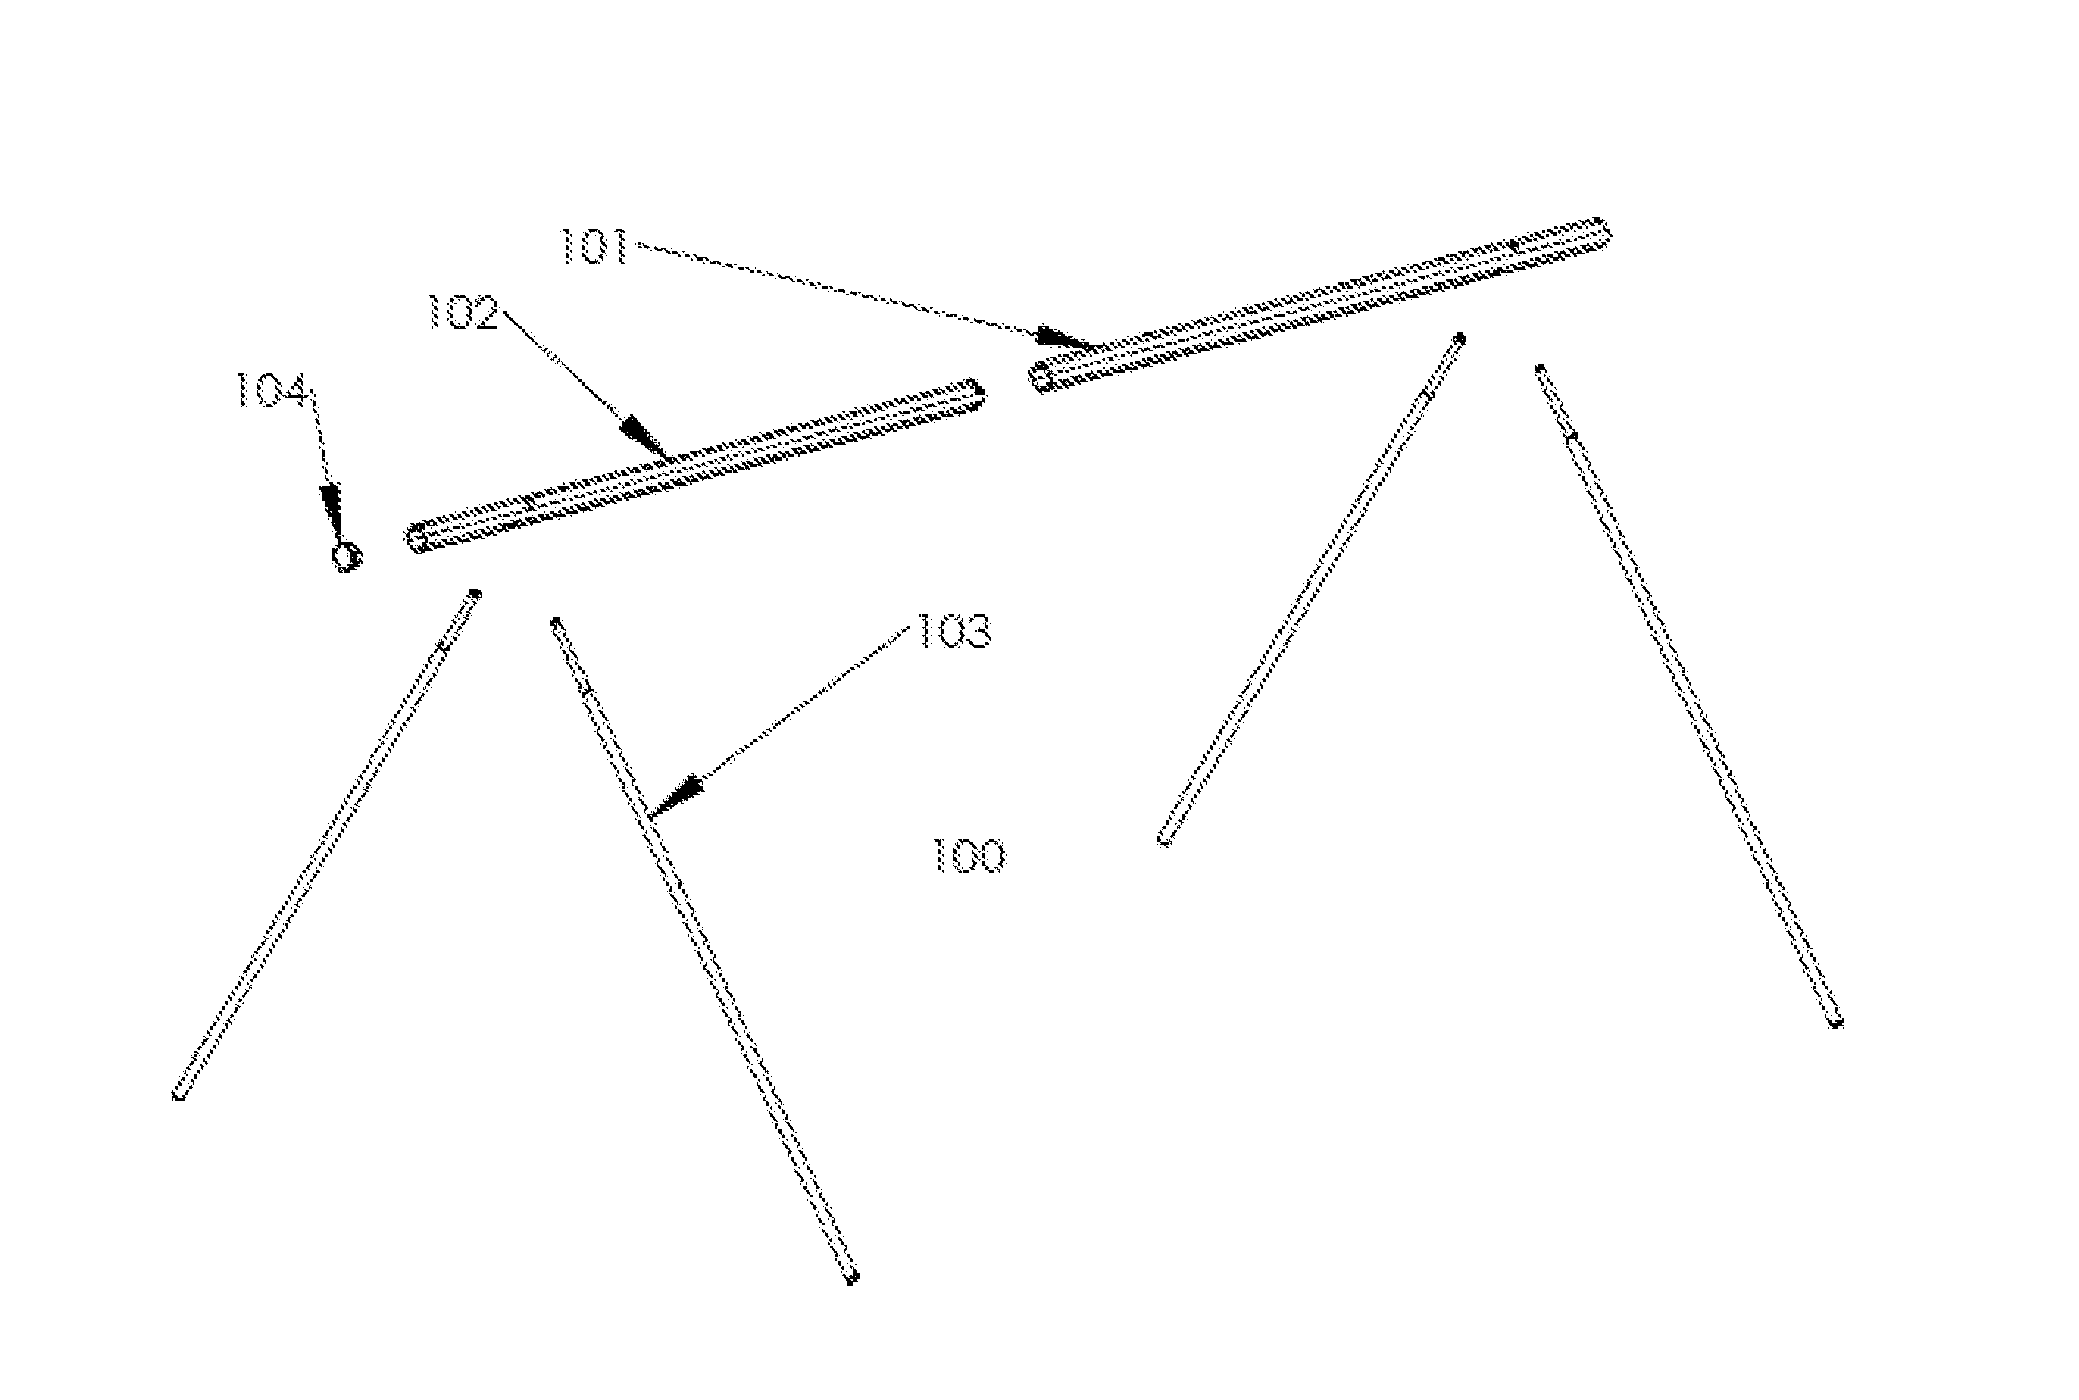 Support structures for hanging equipment